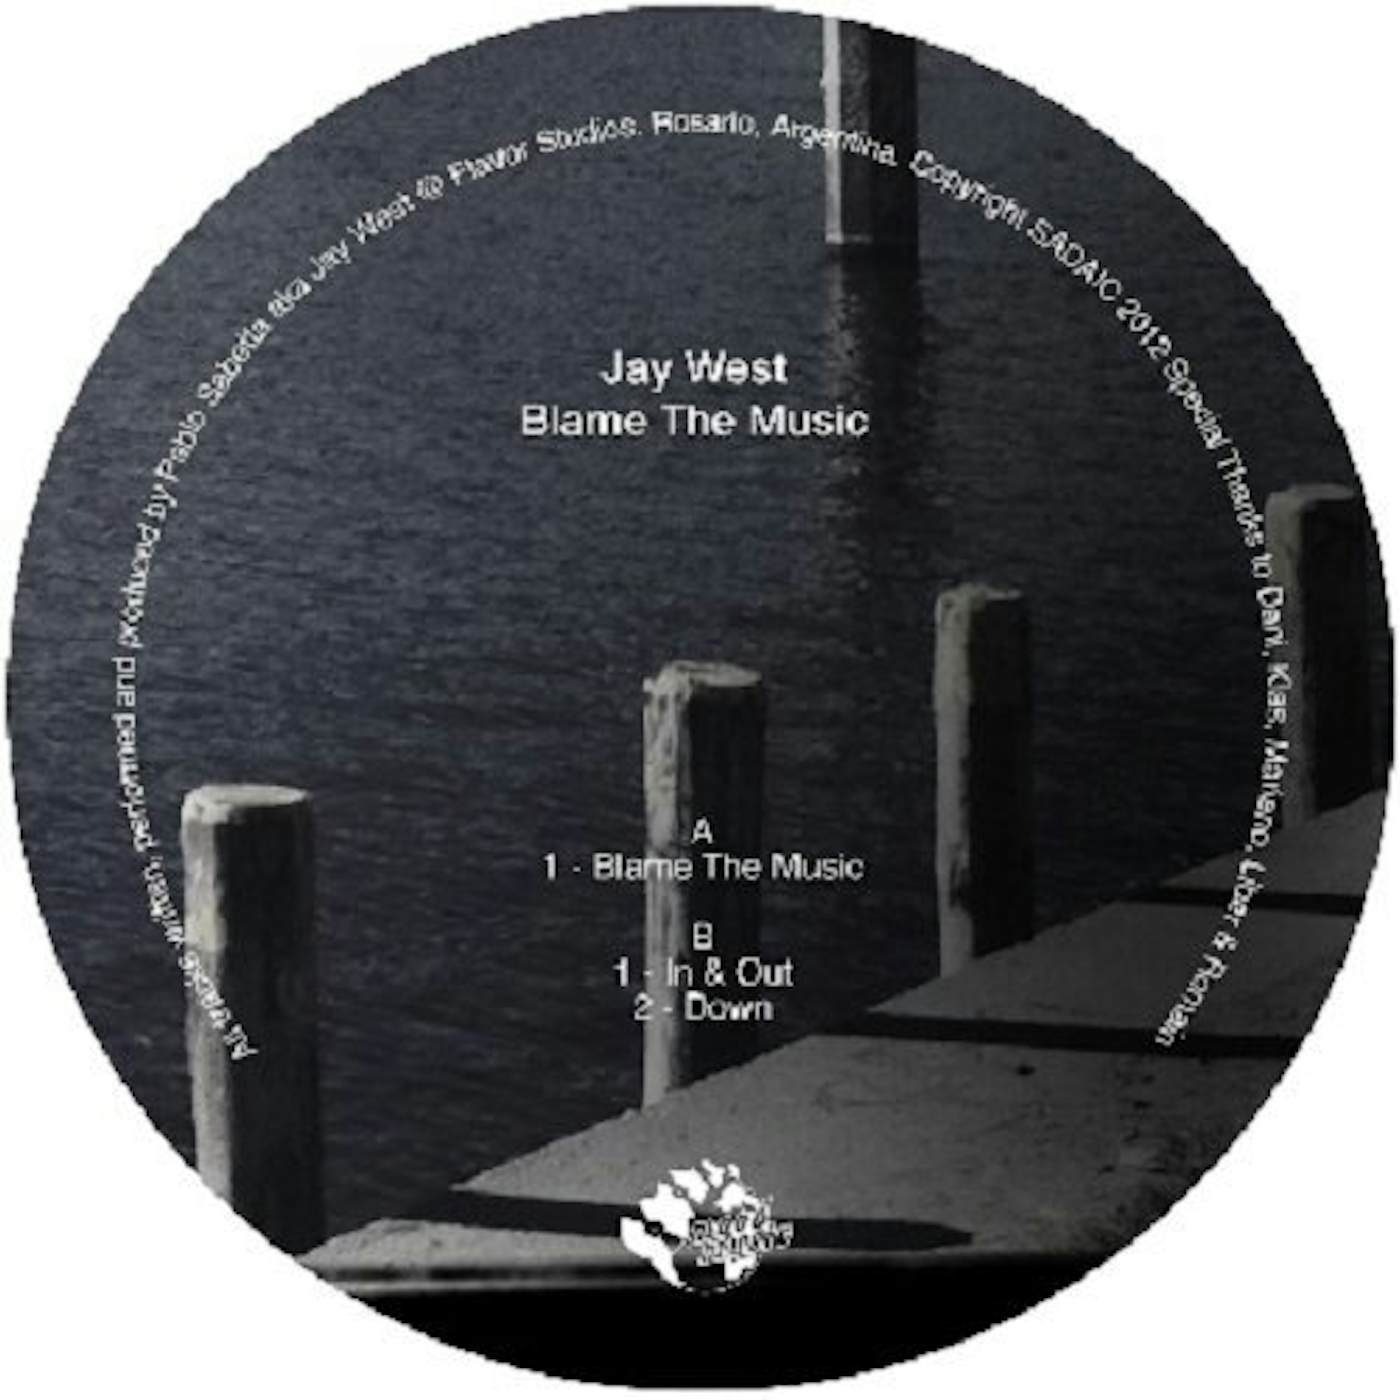 Jay West Blame The Music Vinyl Record